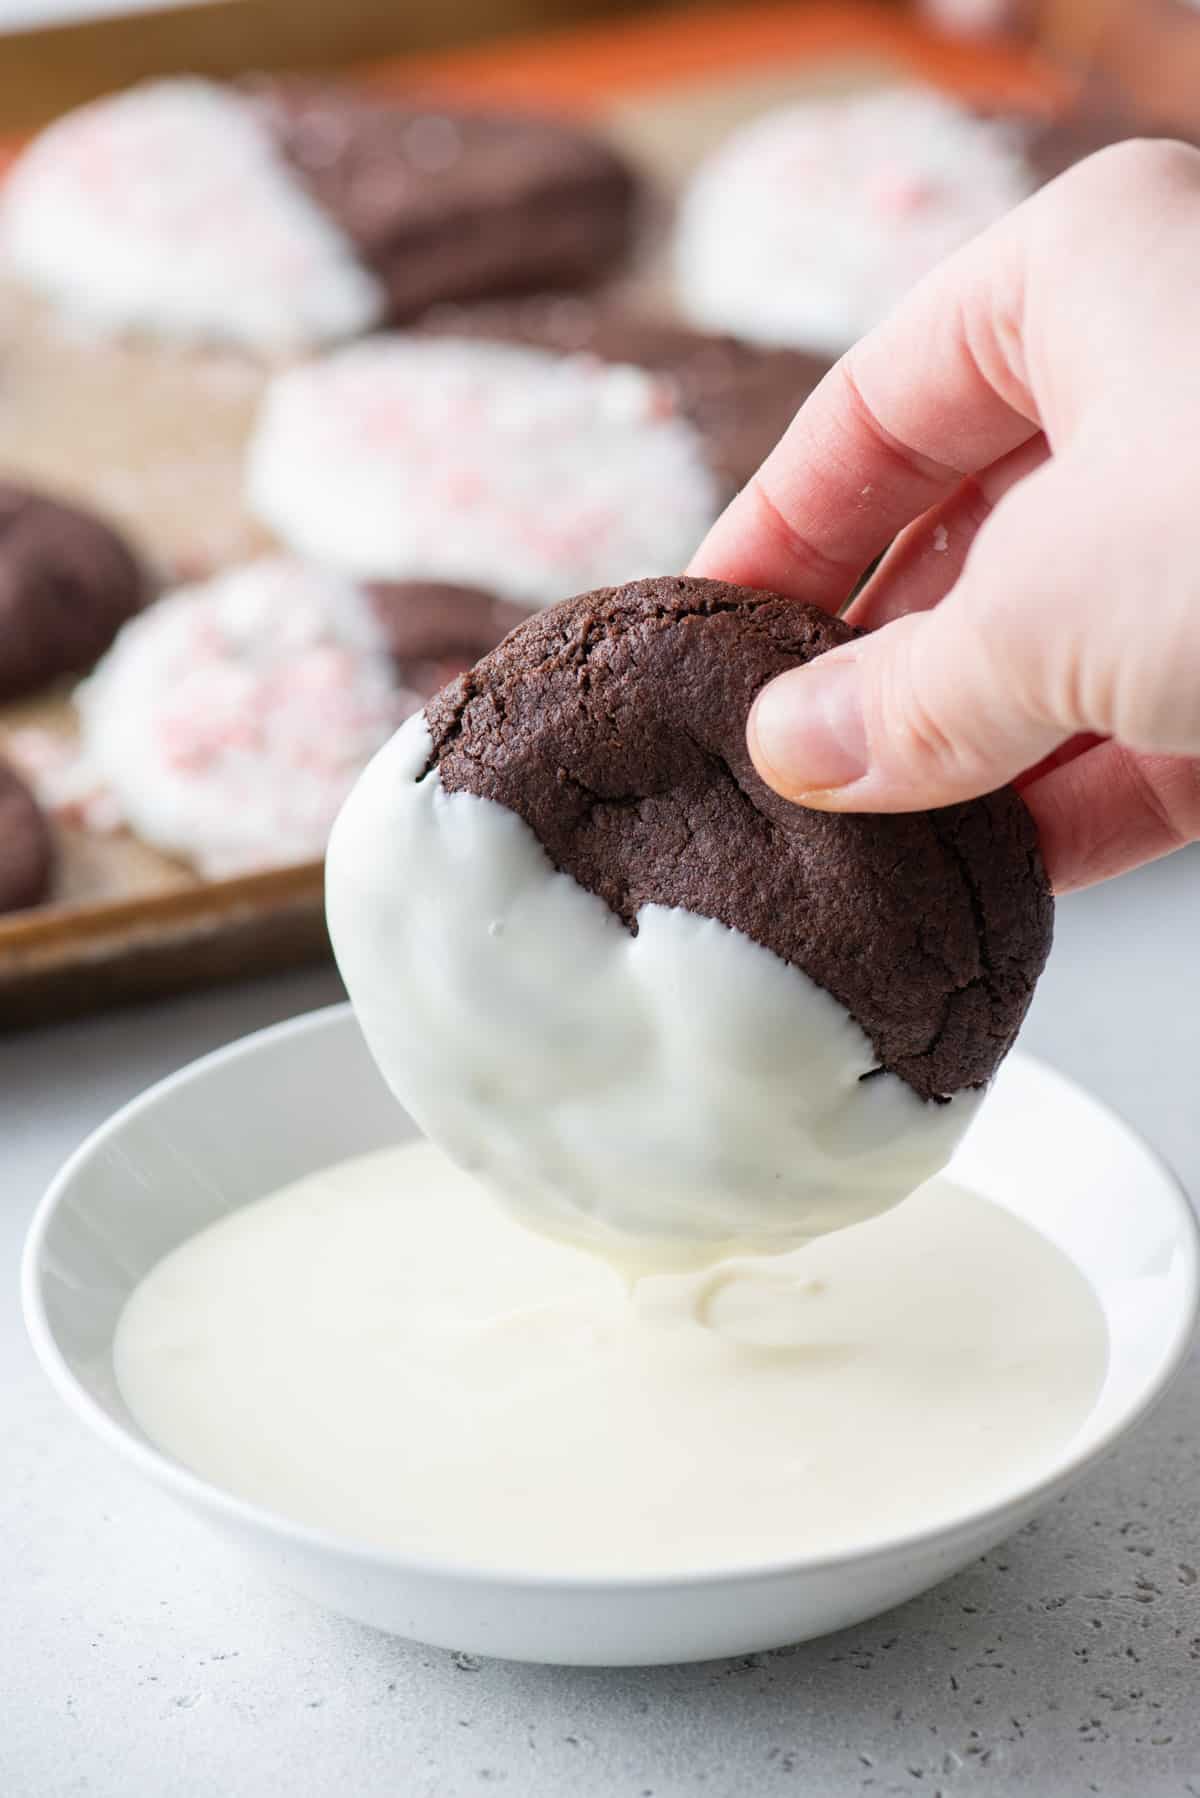 A hand dipping a chocolate cookie into melted white chocolate